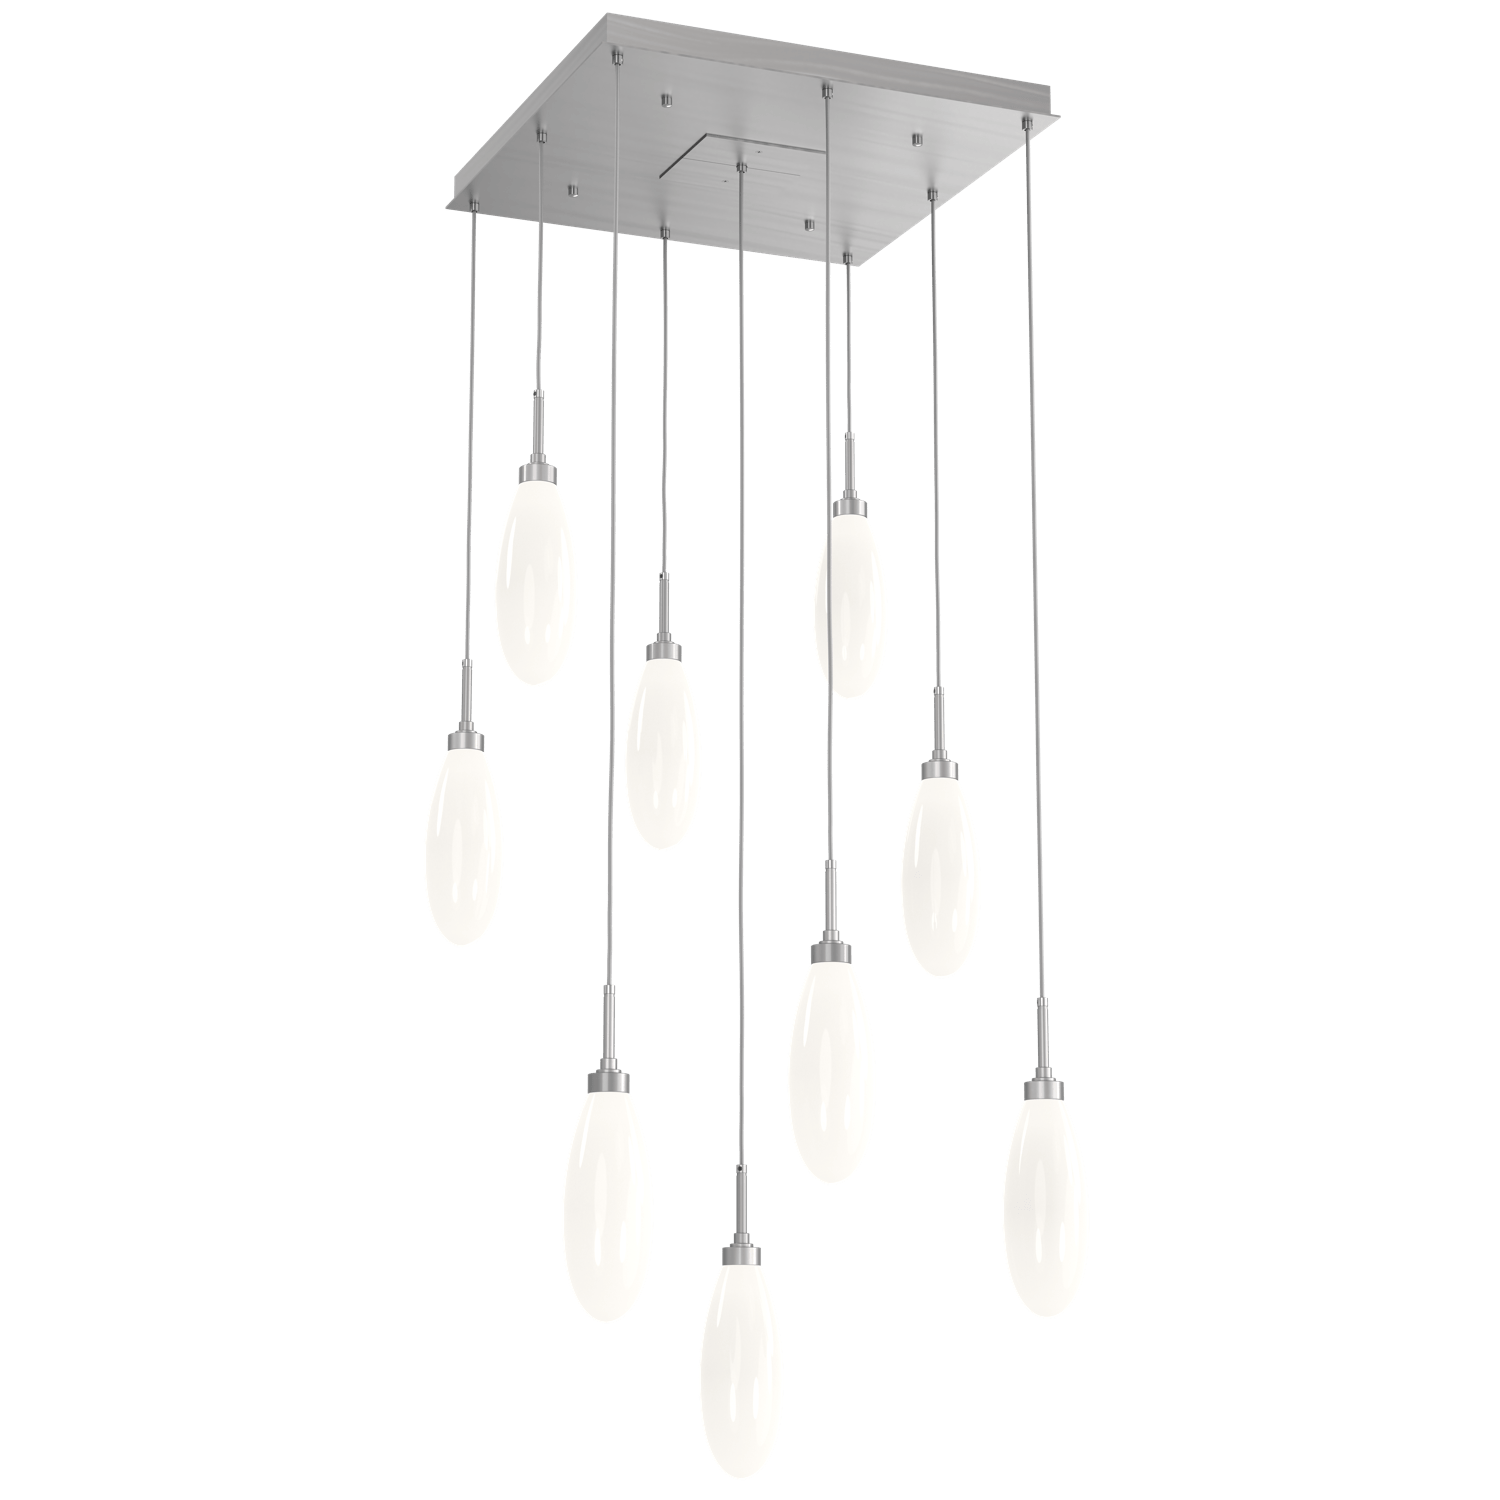 CHB0071-09-SN-WL-LL-Hammerton-Studio-Fiori-9-light-square-pendant-chandelier-with-satin-nickel-finish-and-opal-white-glass-shades-and-LED-lamping